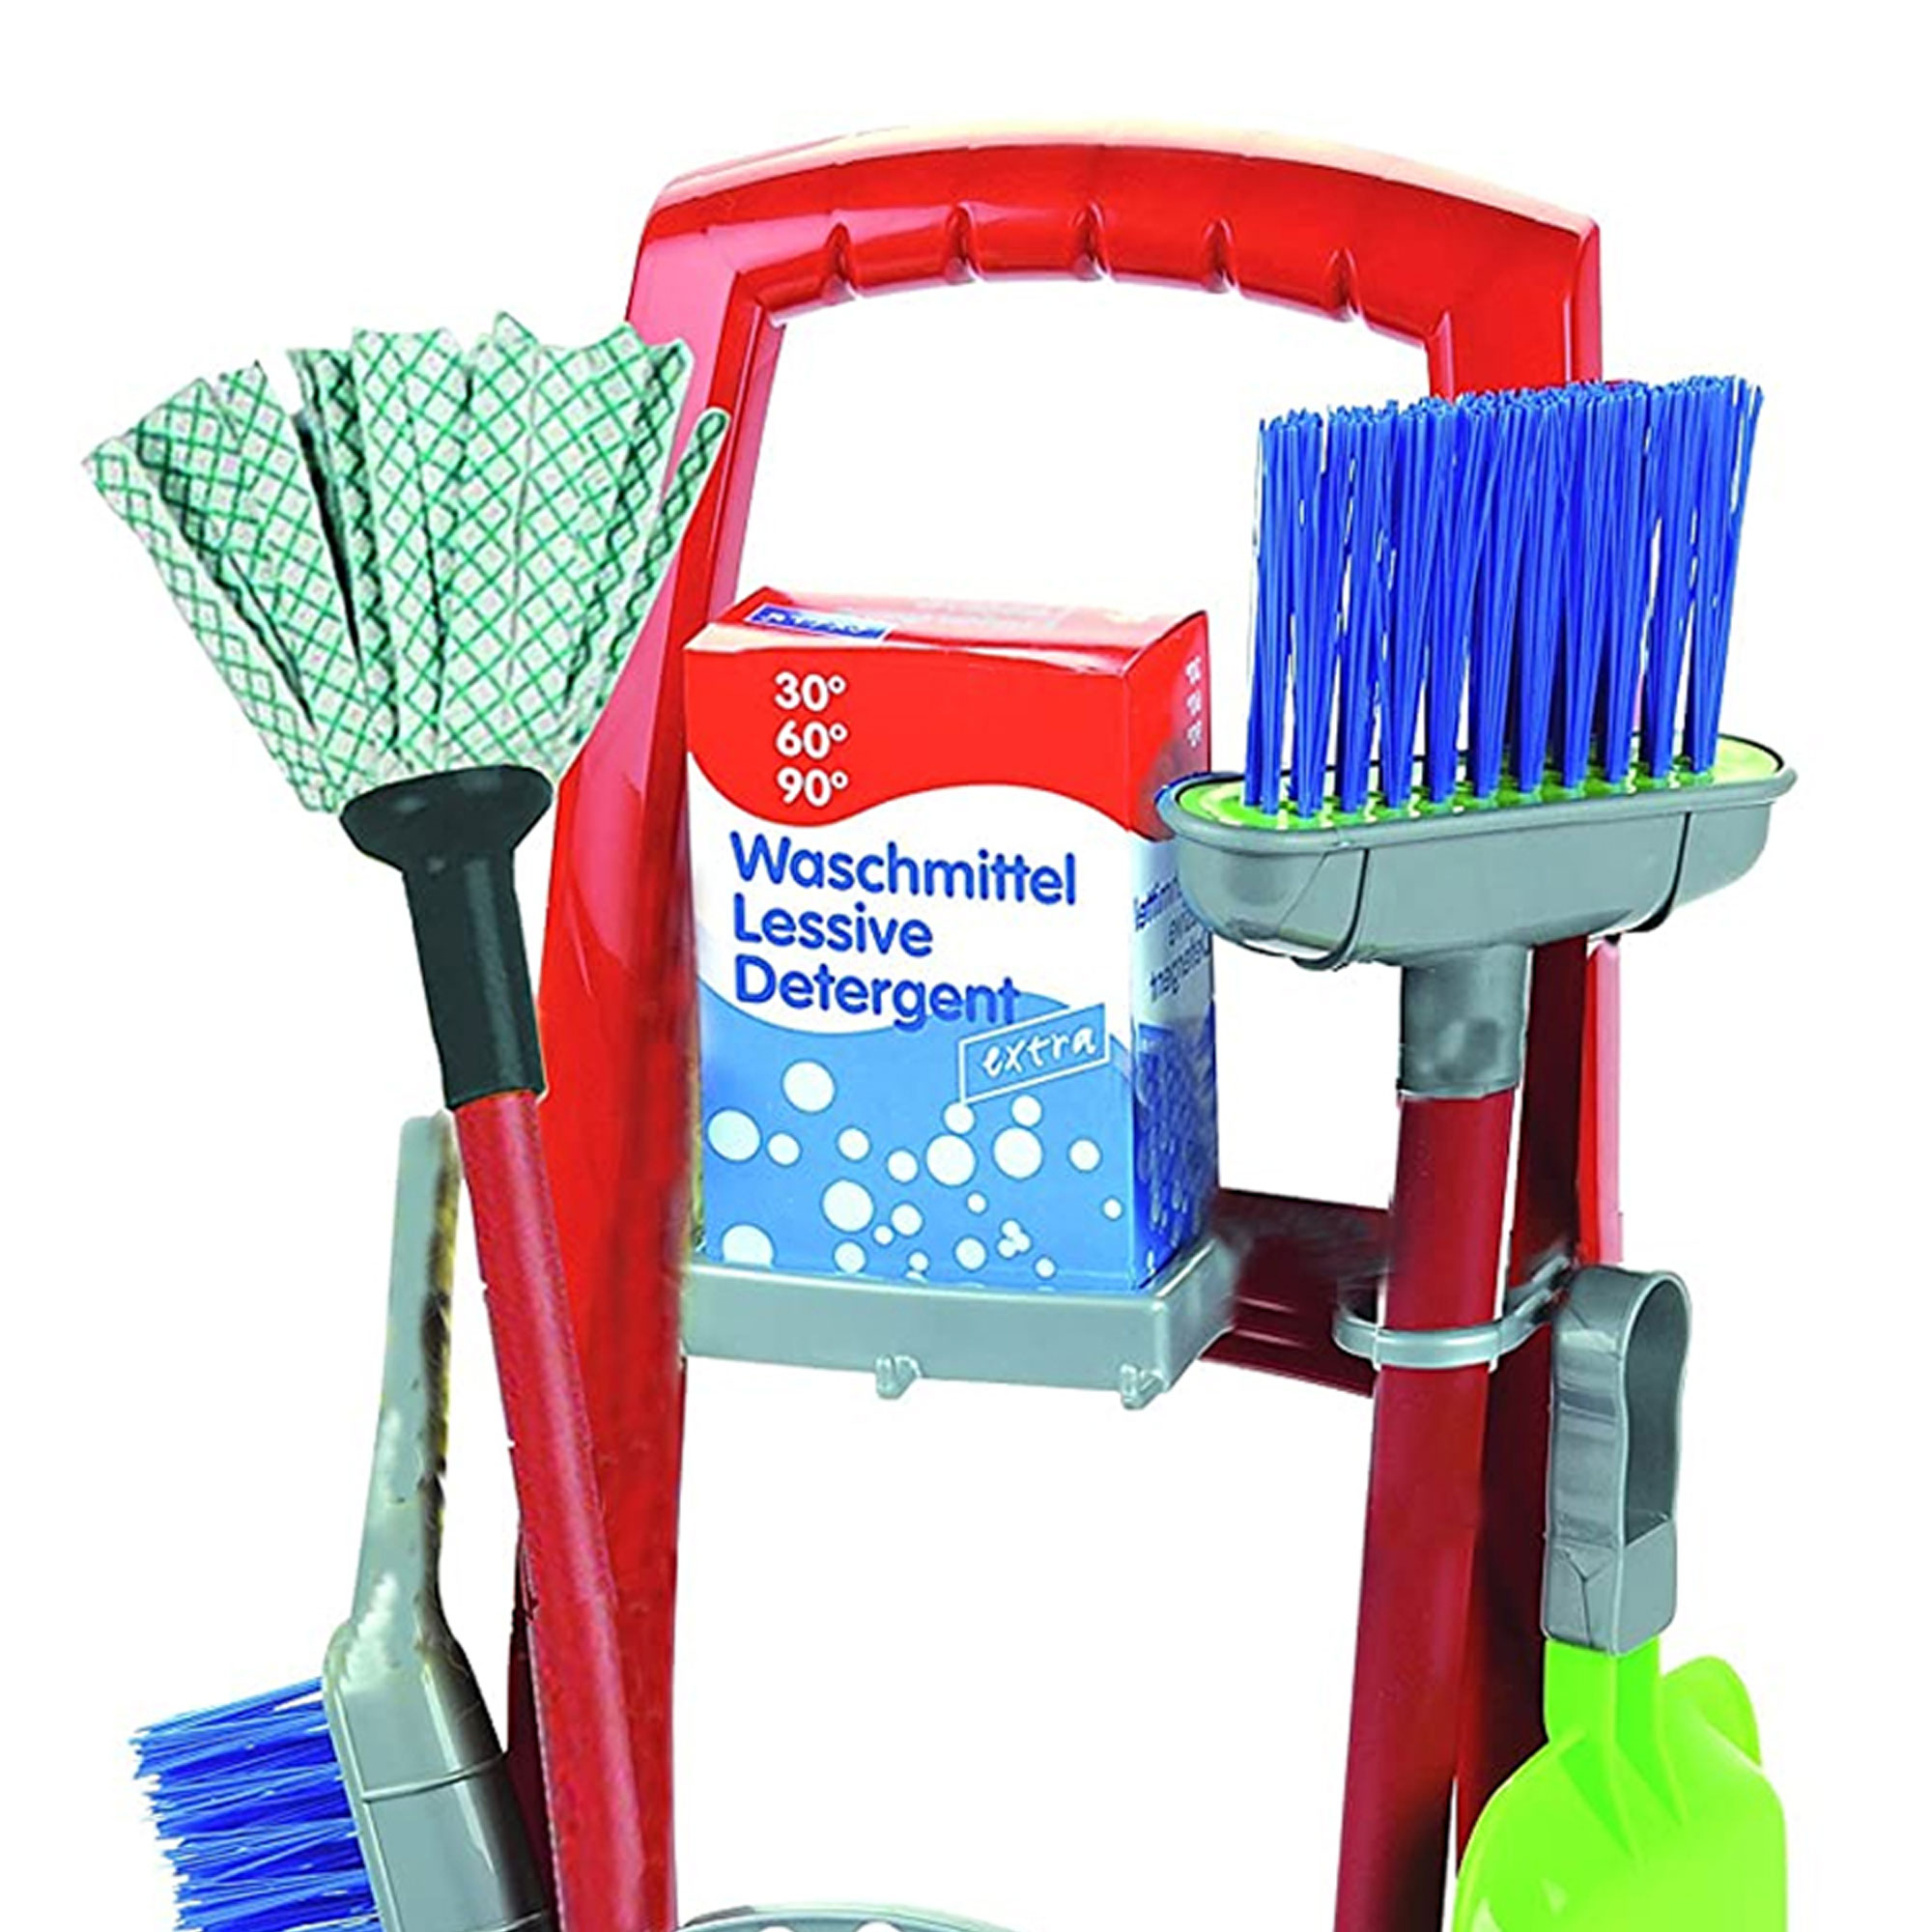 Theo Klein: Cleaning Trolley Set - Kid's 8 Piece Toy Set Includes: Trolley, Bucket, Mop, Broom, Dustpan w/ Brush, Bottle & Detergent Box, Kids Pretend Play, Ages 3+ - image 2 of 5